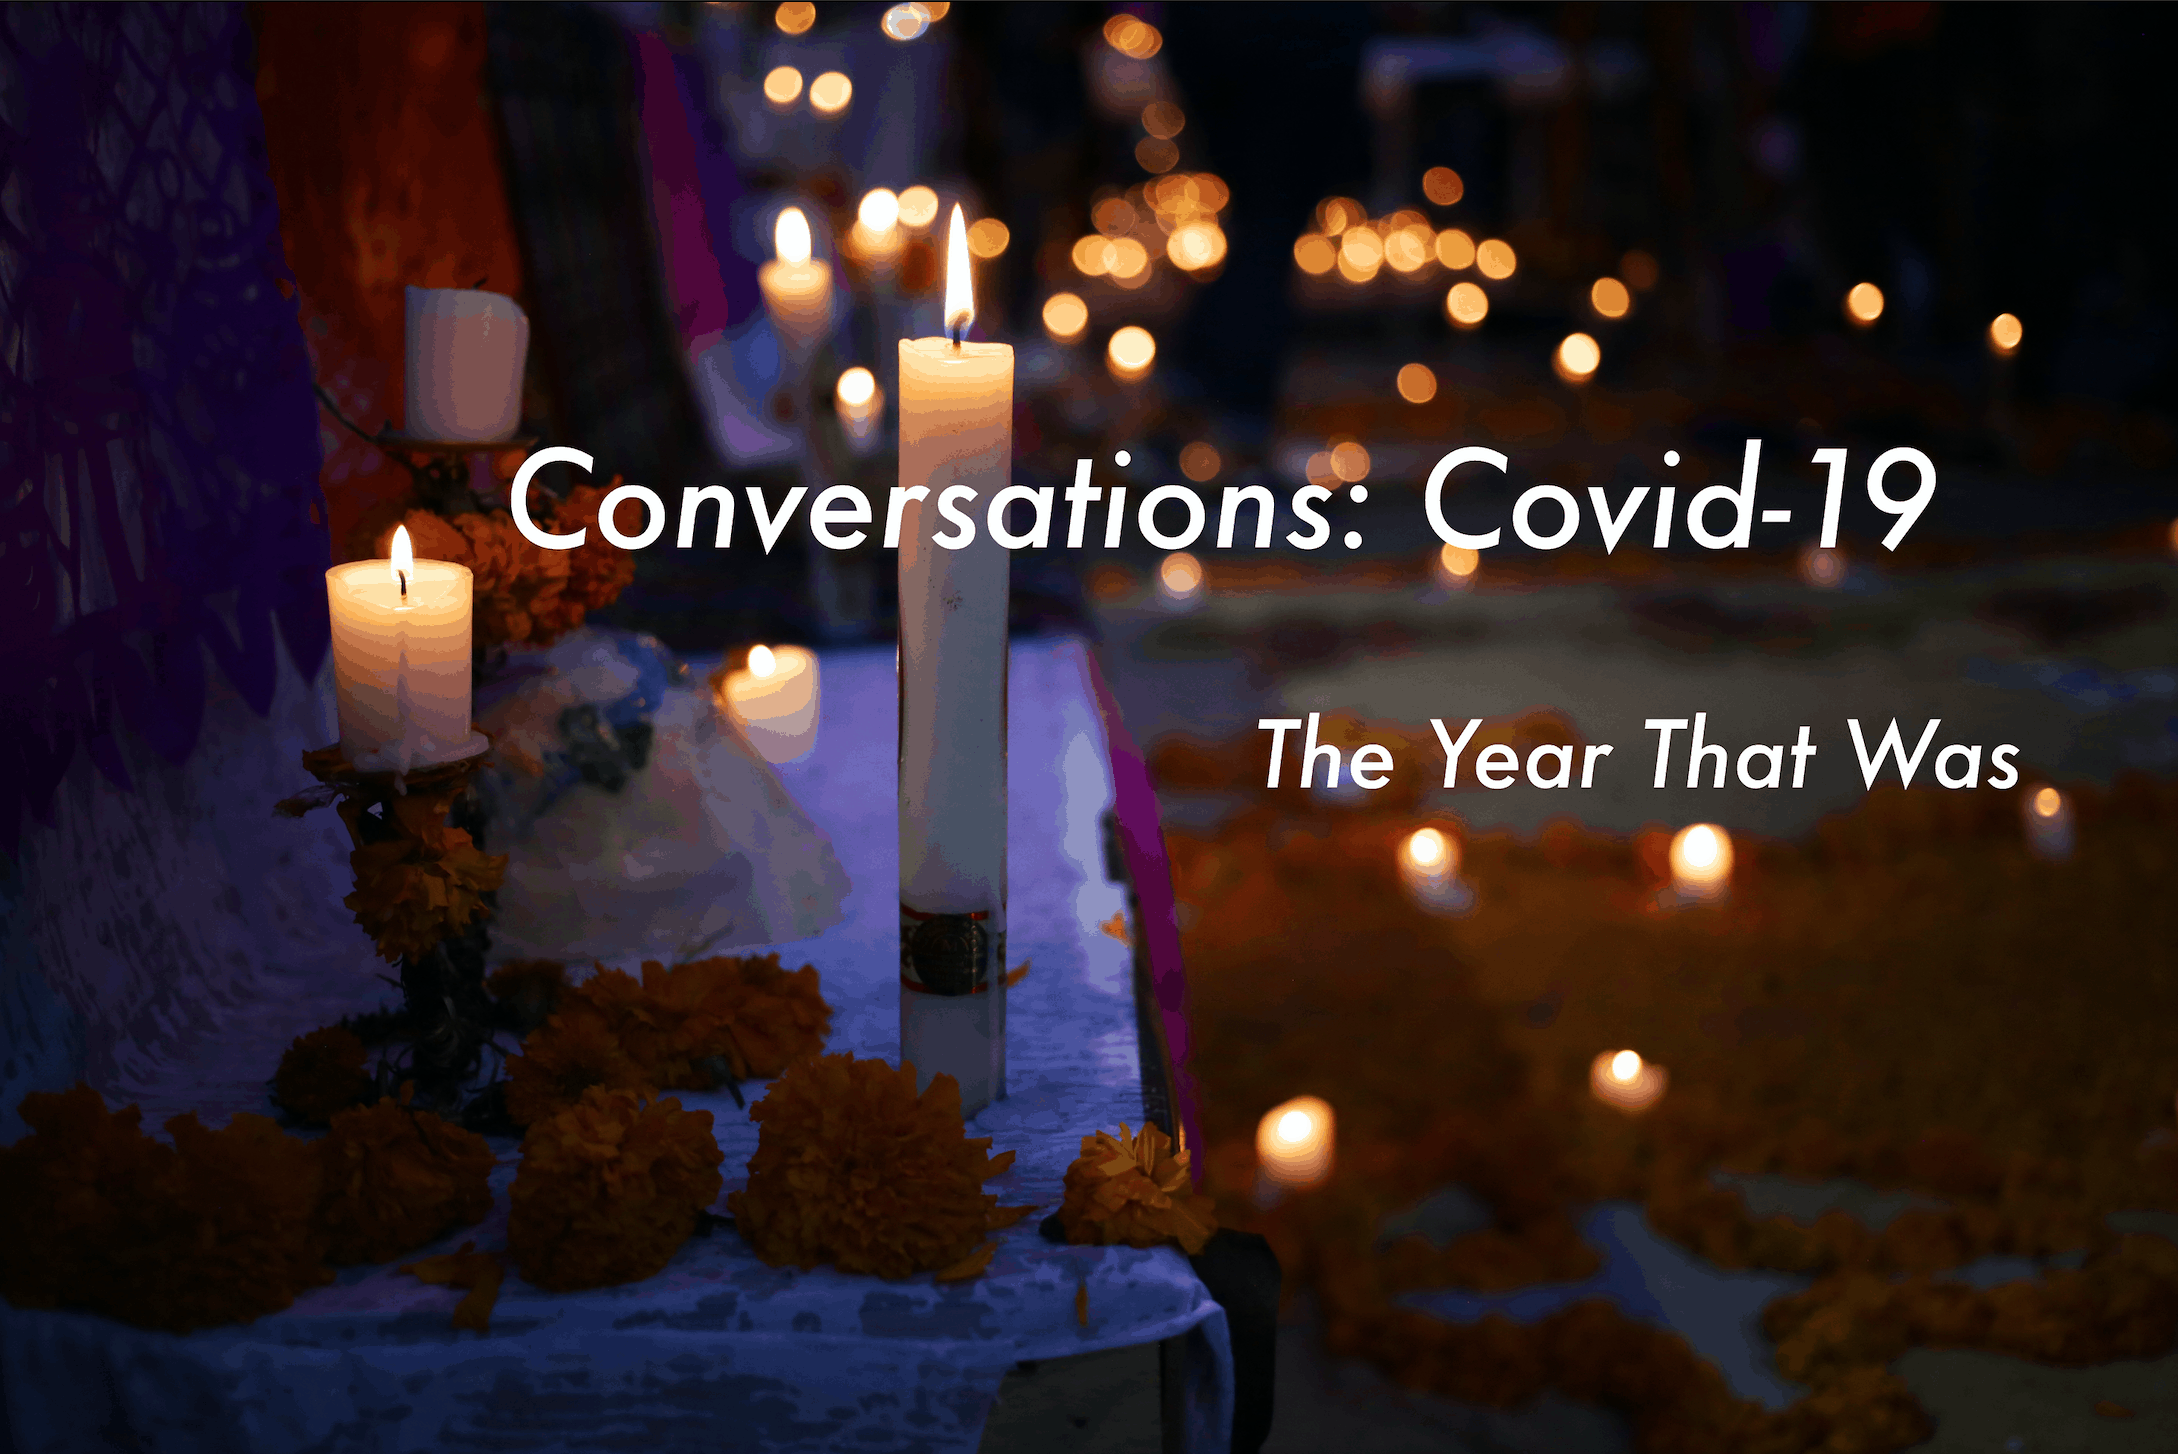 Covid-19: 2020—The Year That Was